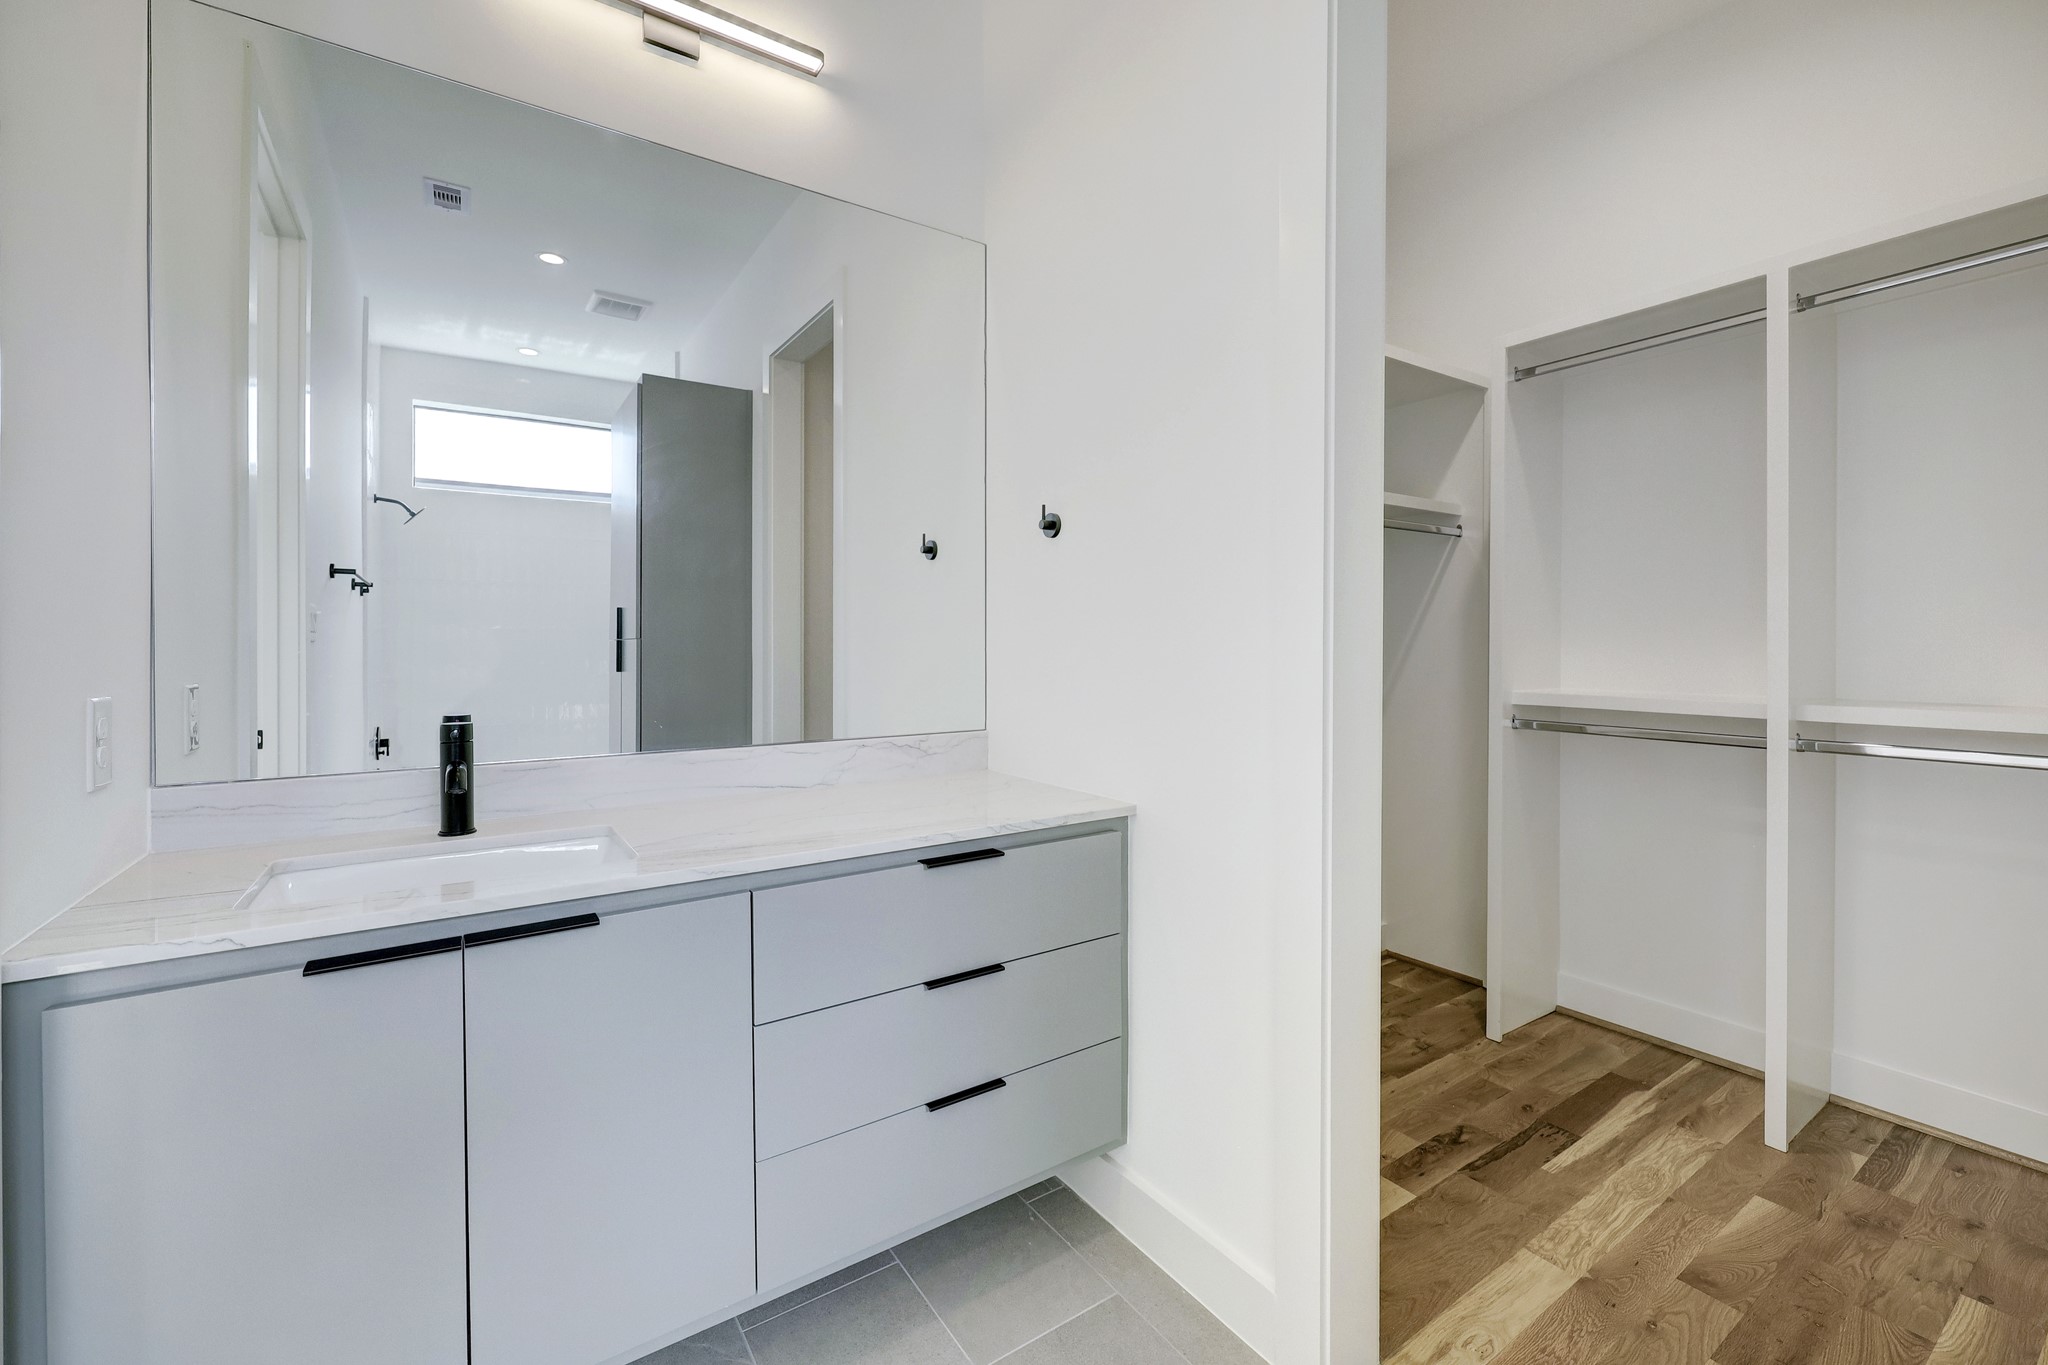 En-suite bathroom and walk-in closet with built-in chest of drawers in all secondary bedrooms